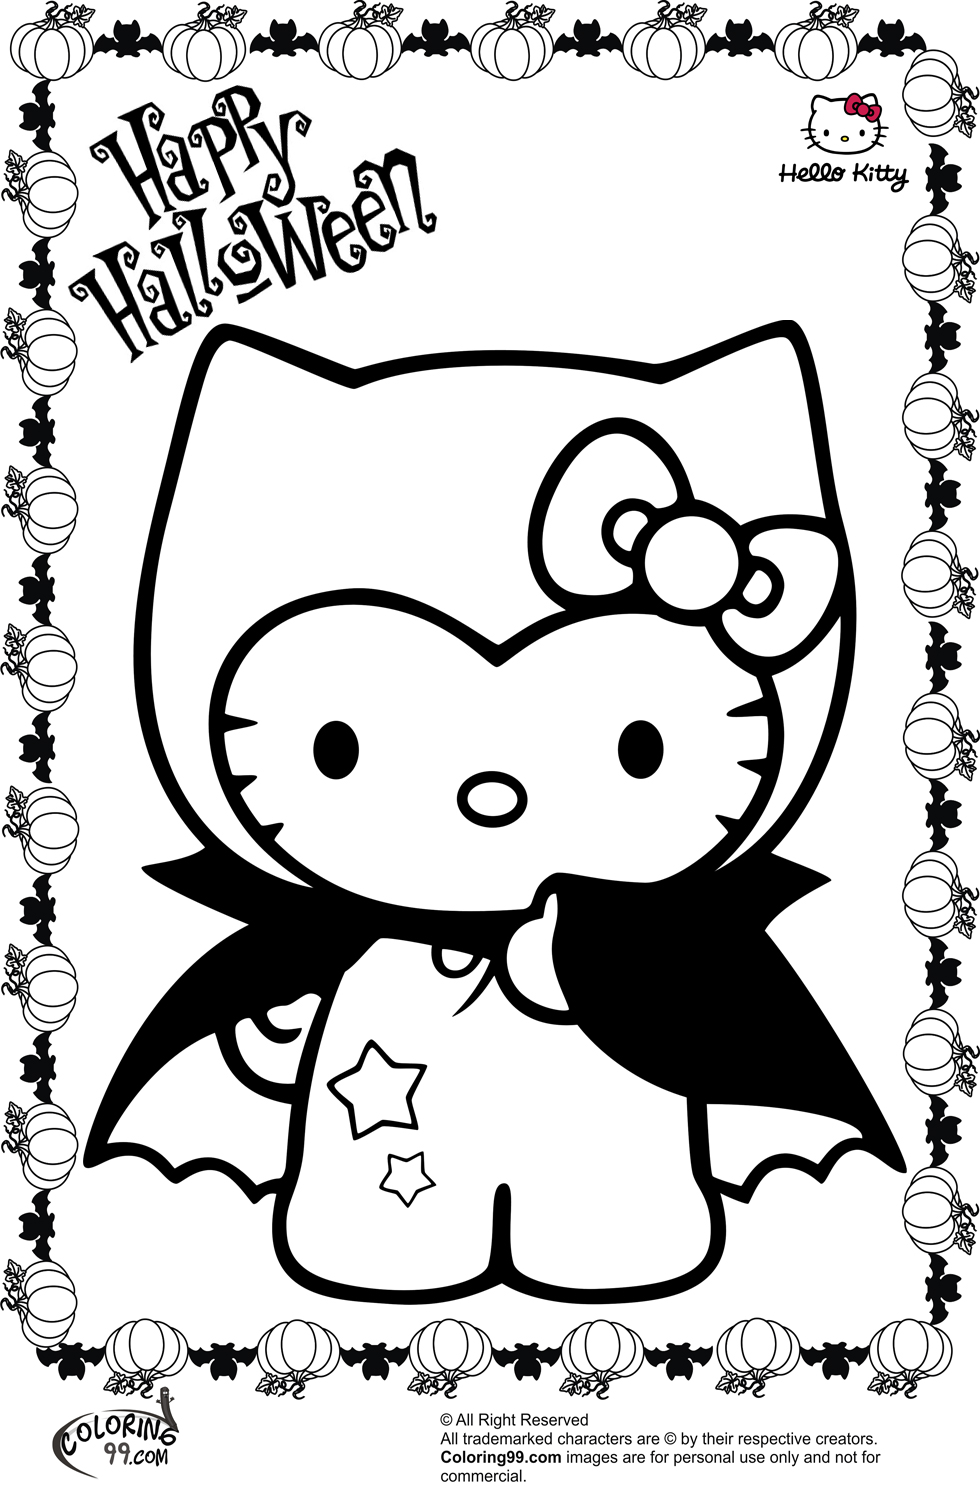 Free Holloween Coloring Sheets 2